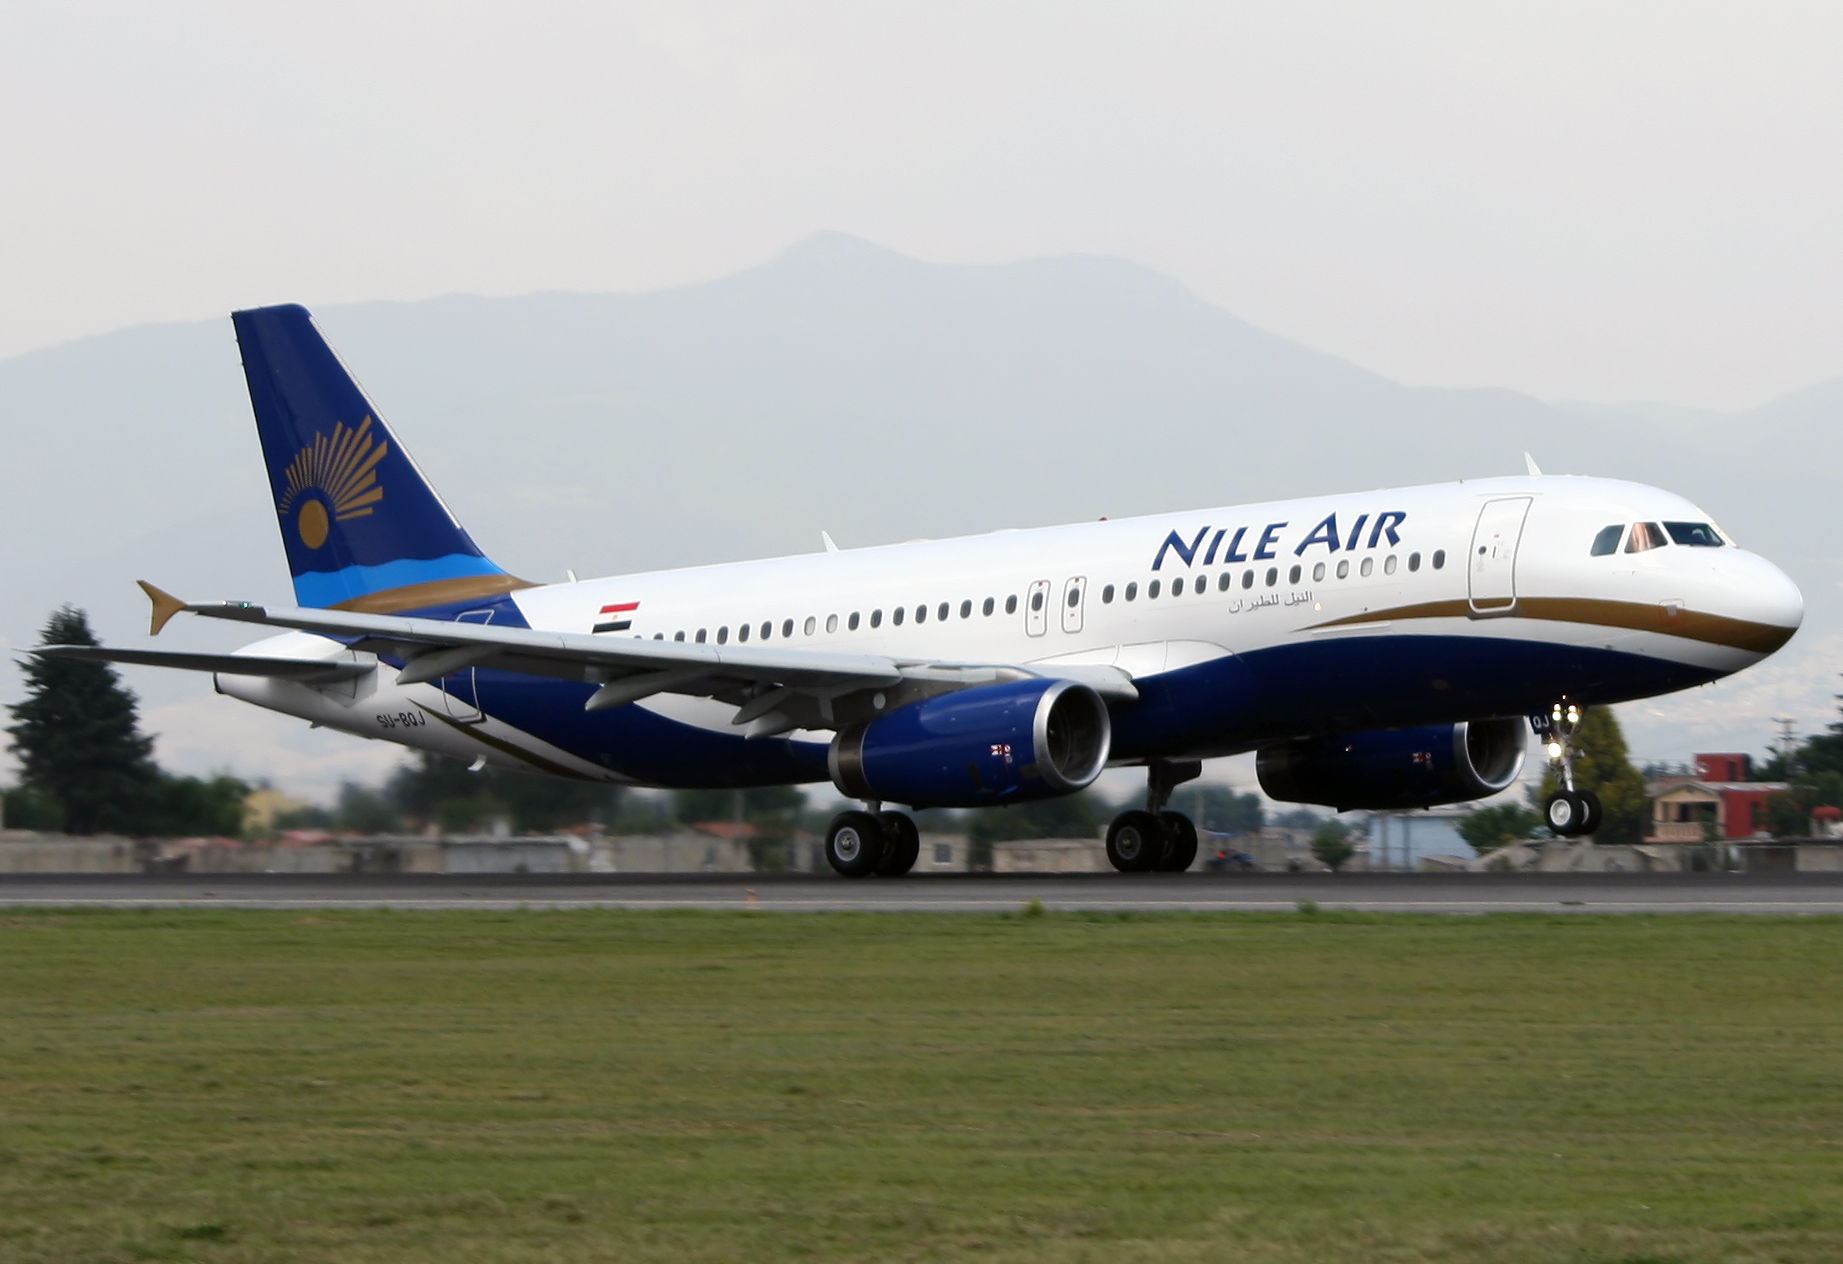 Nile Air starts link between Cairo Airport and Al Ain Airport